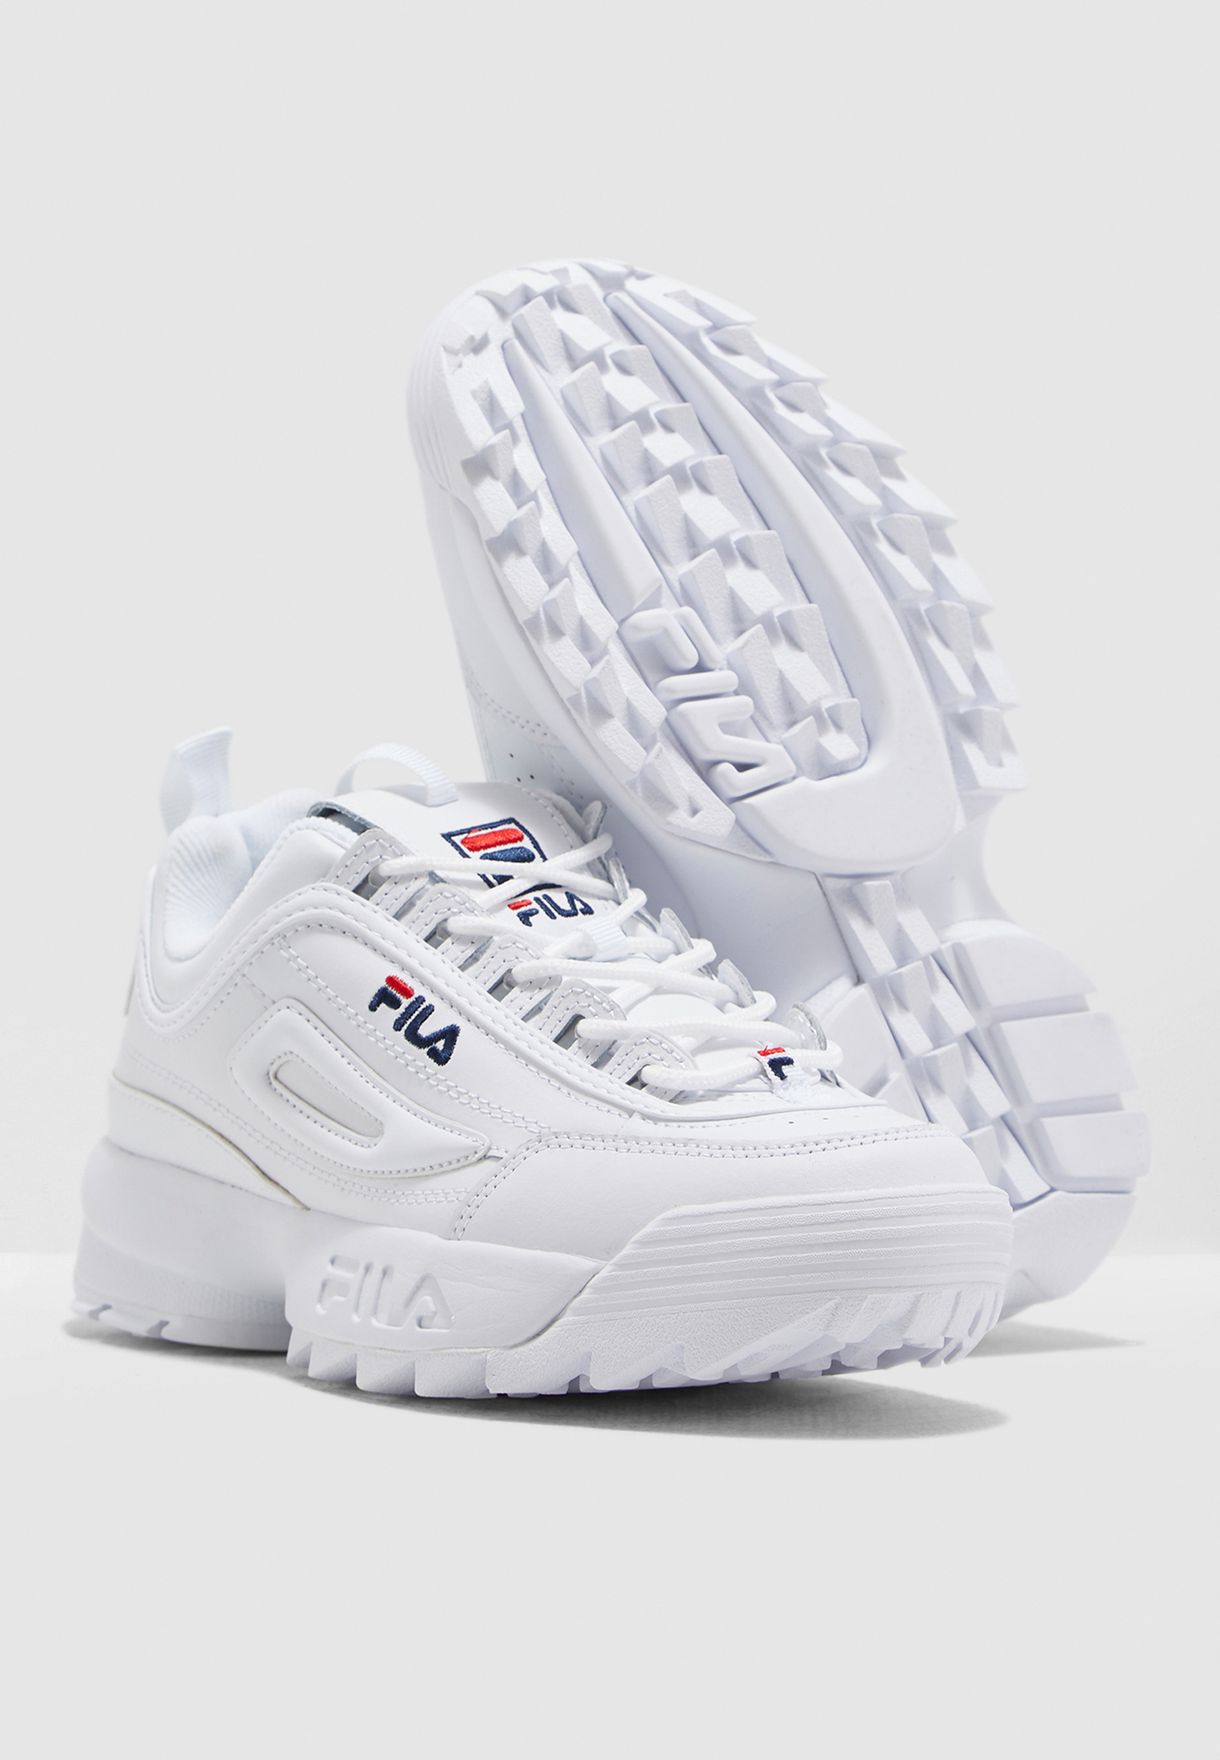 the price of fila shoes